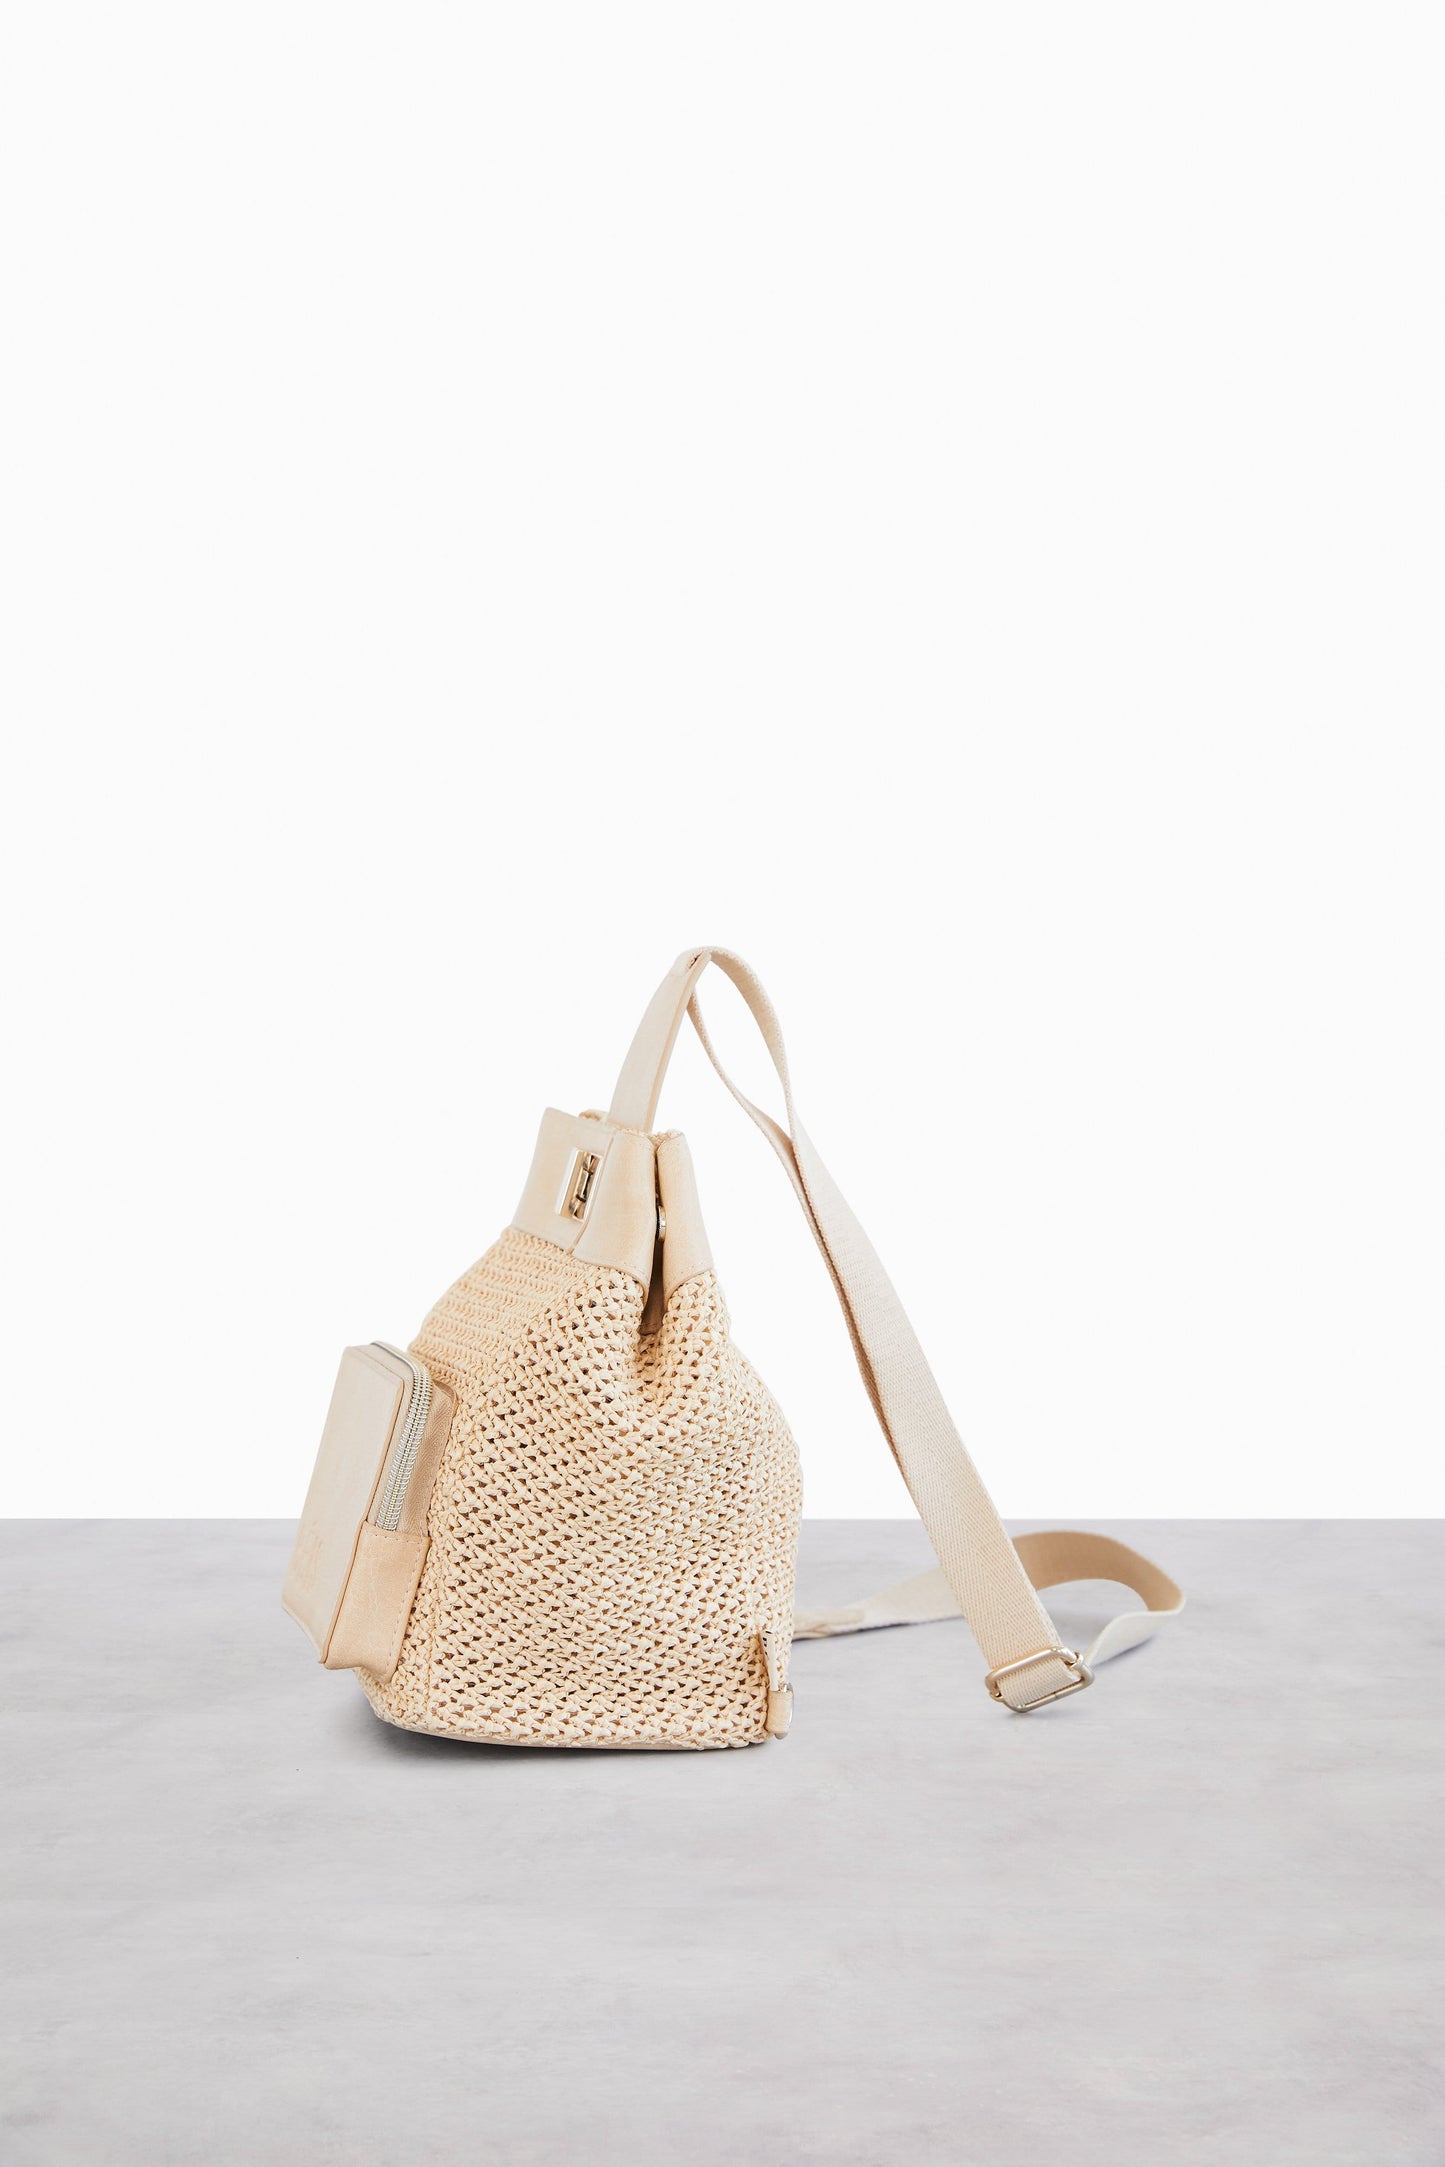 The Naturals Sling in Beige